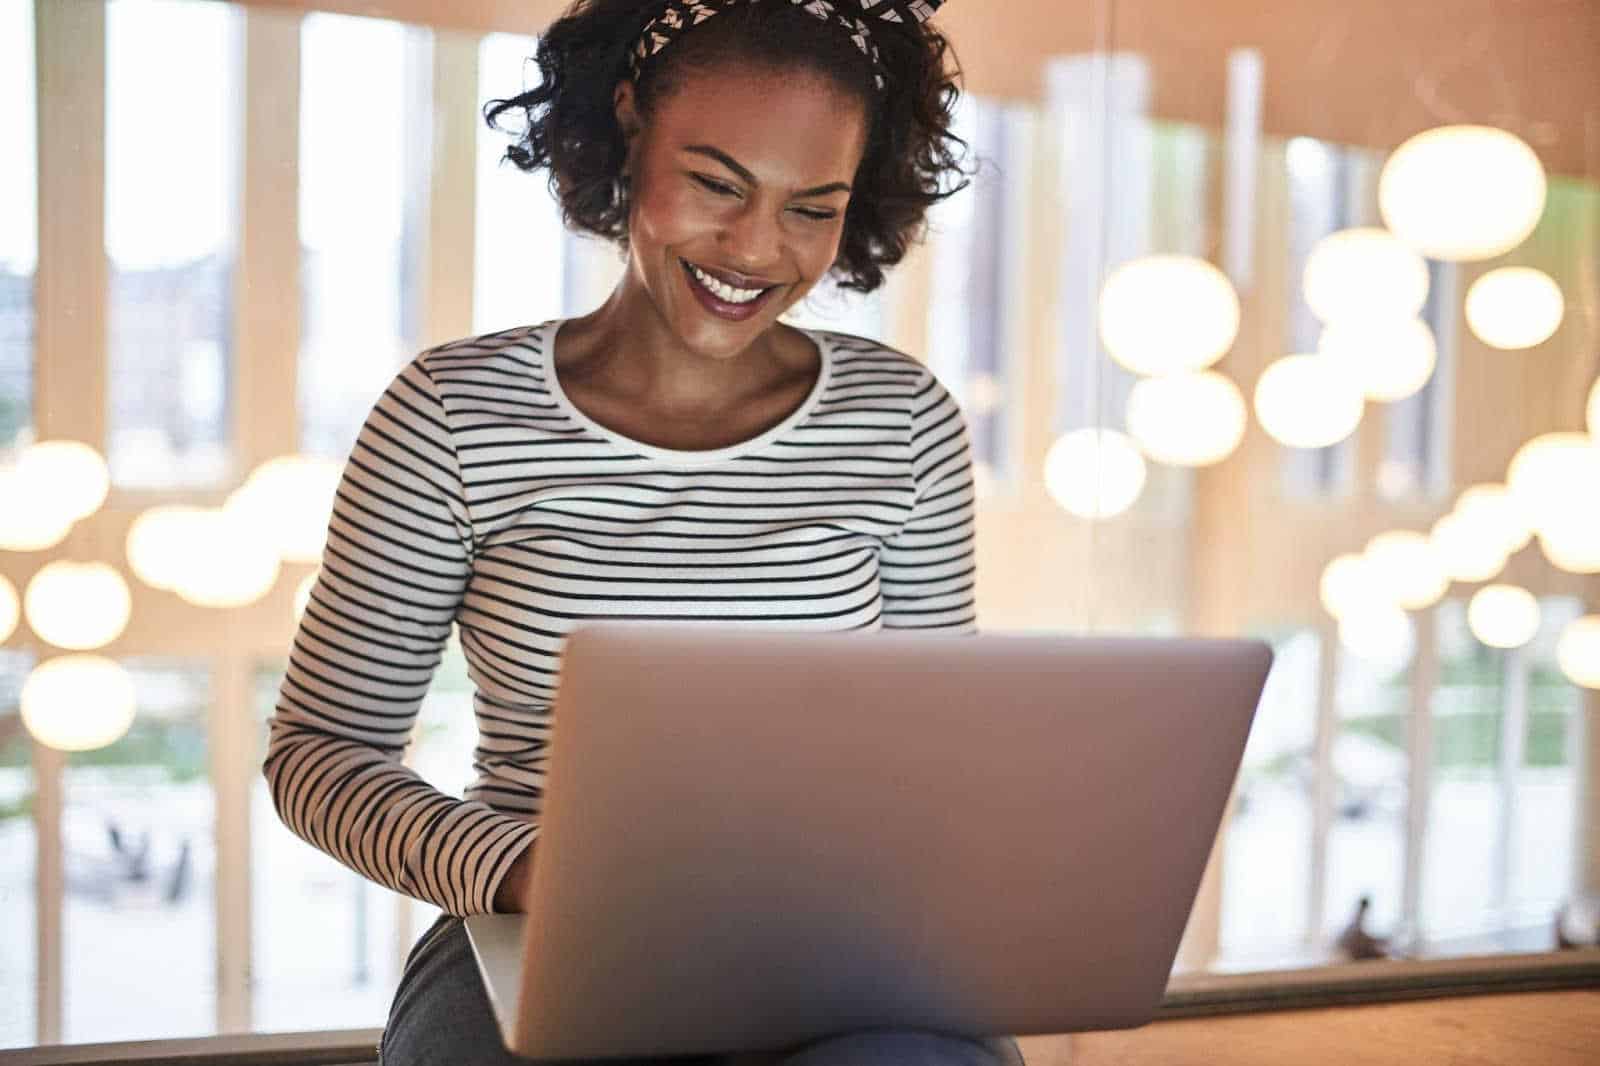 smiling woman looking at her laptop placed on her lap